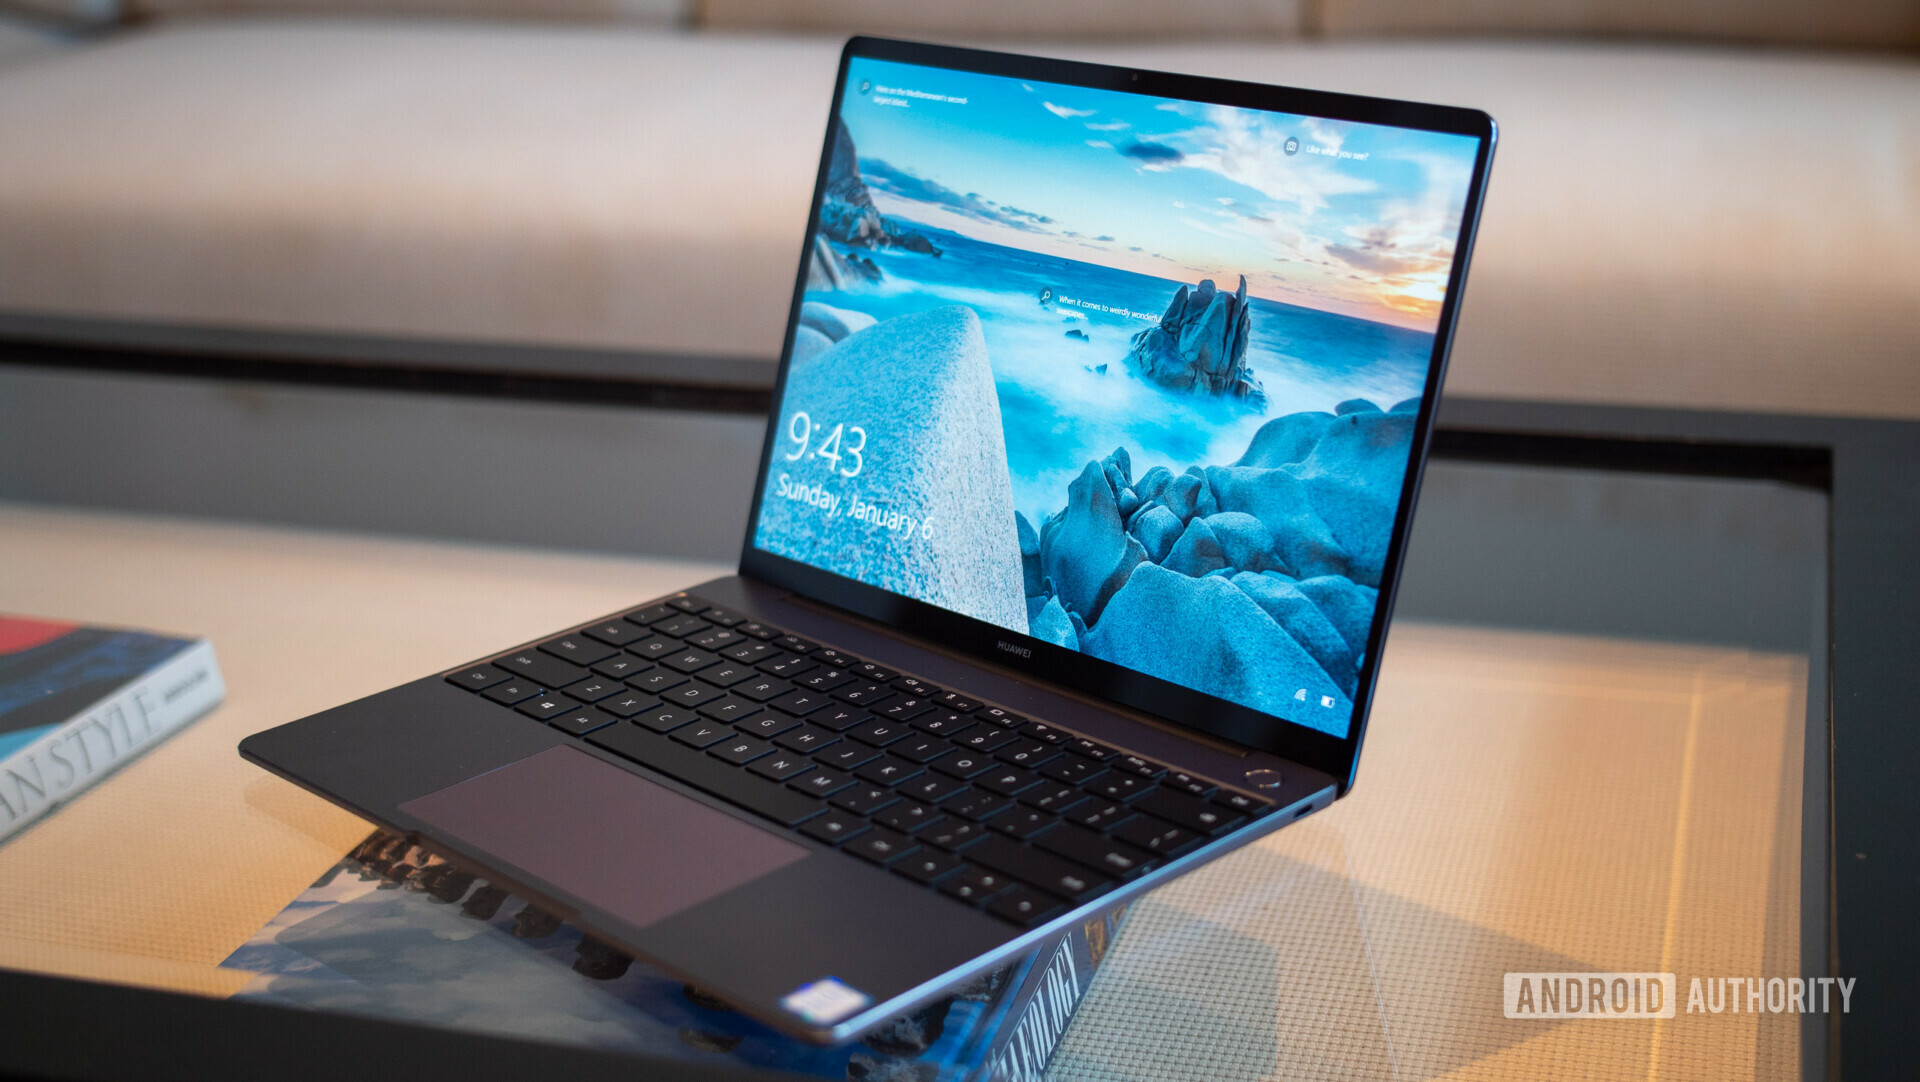 New affordable MateBook 13 targets Apple's MacBook Air at CES 2019